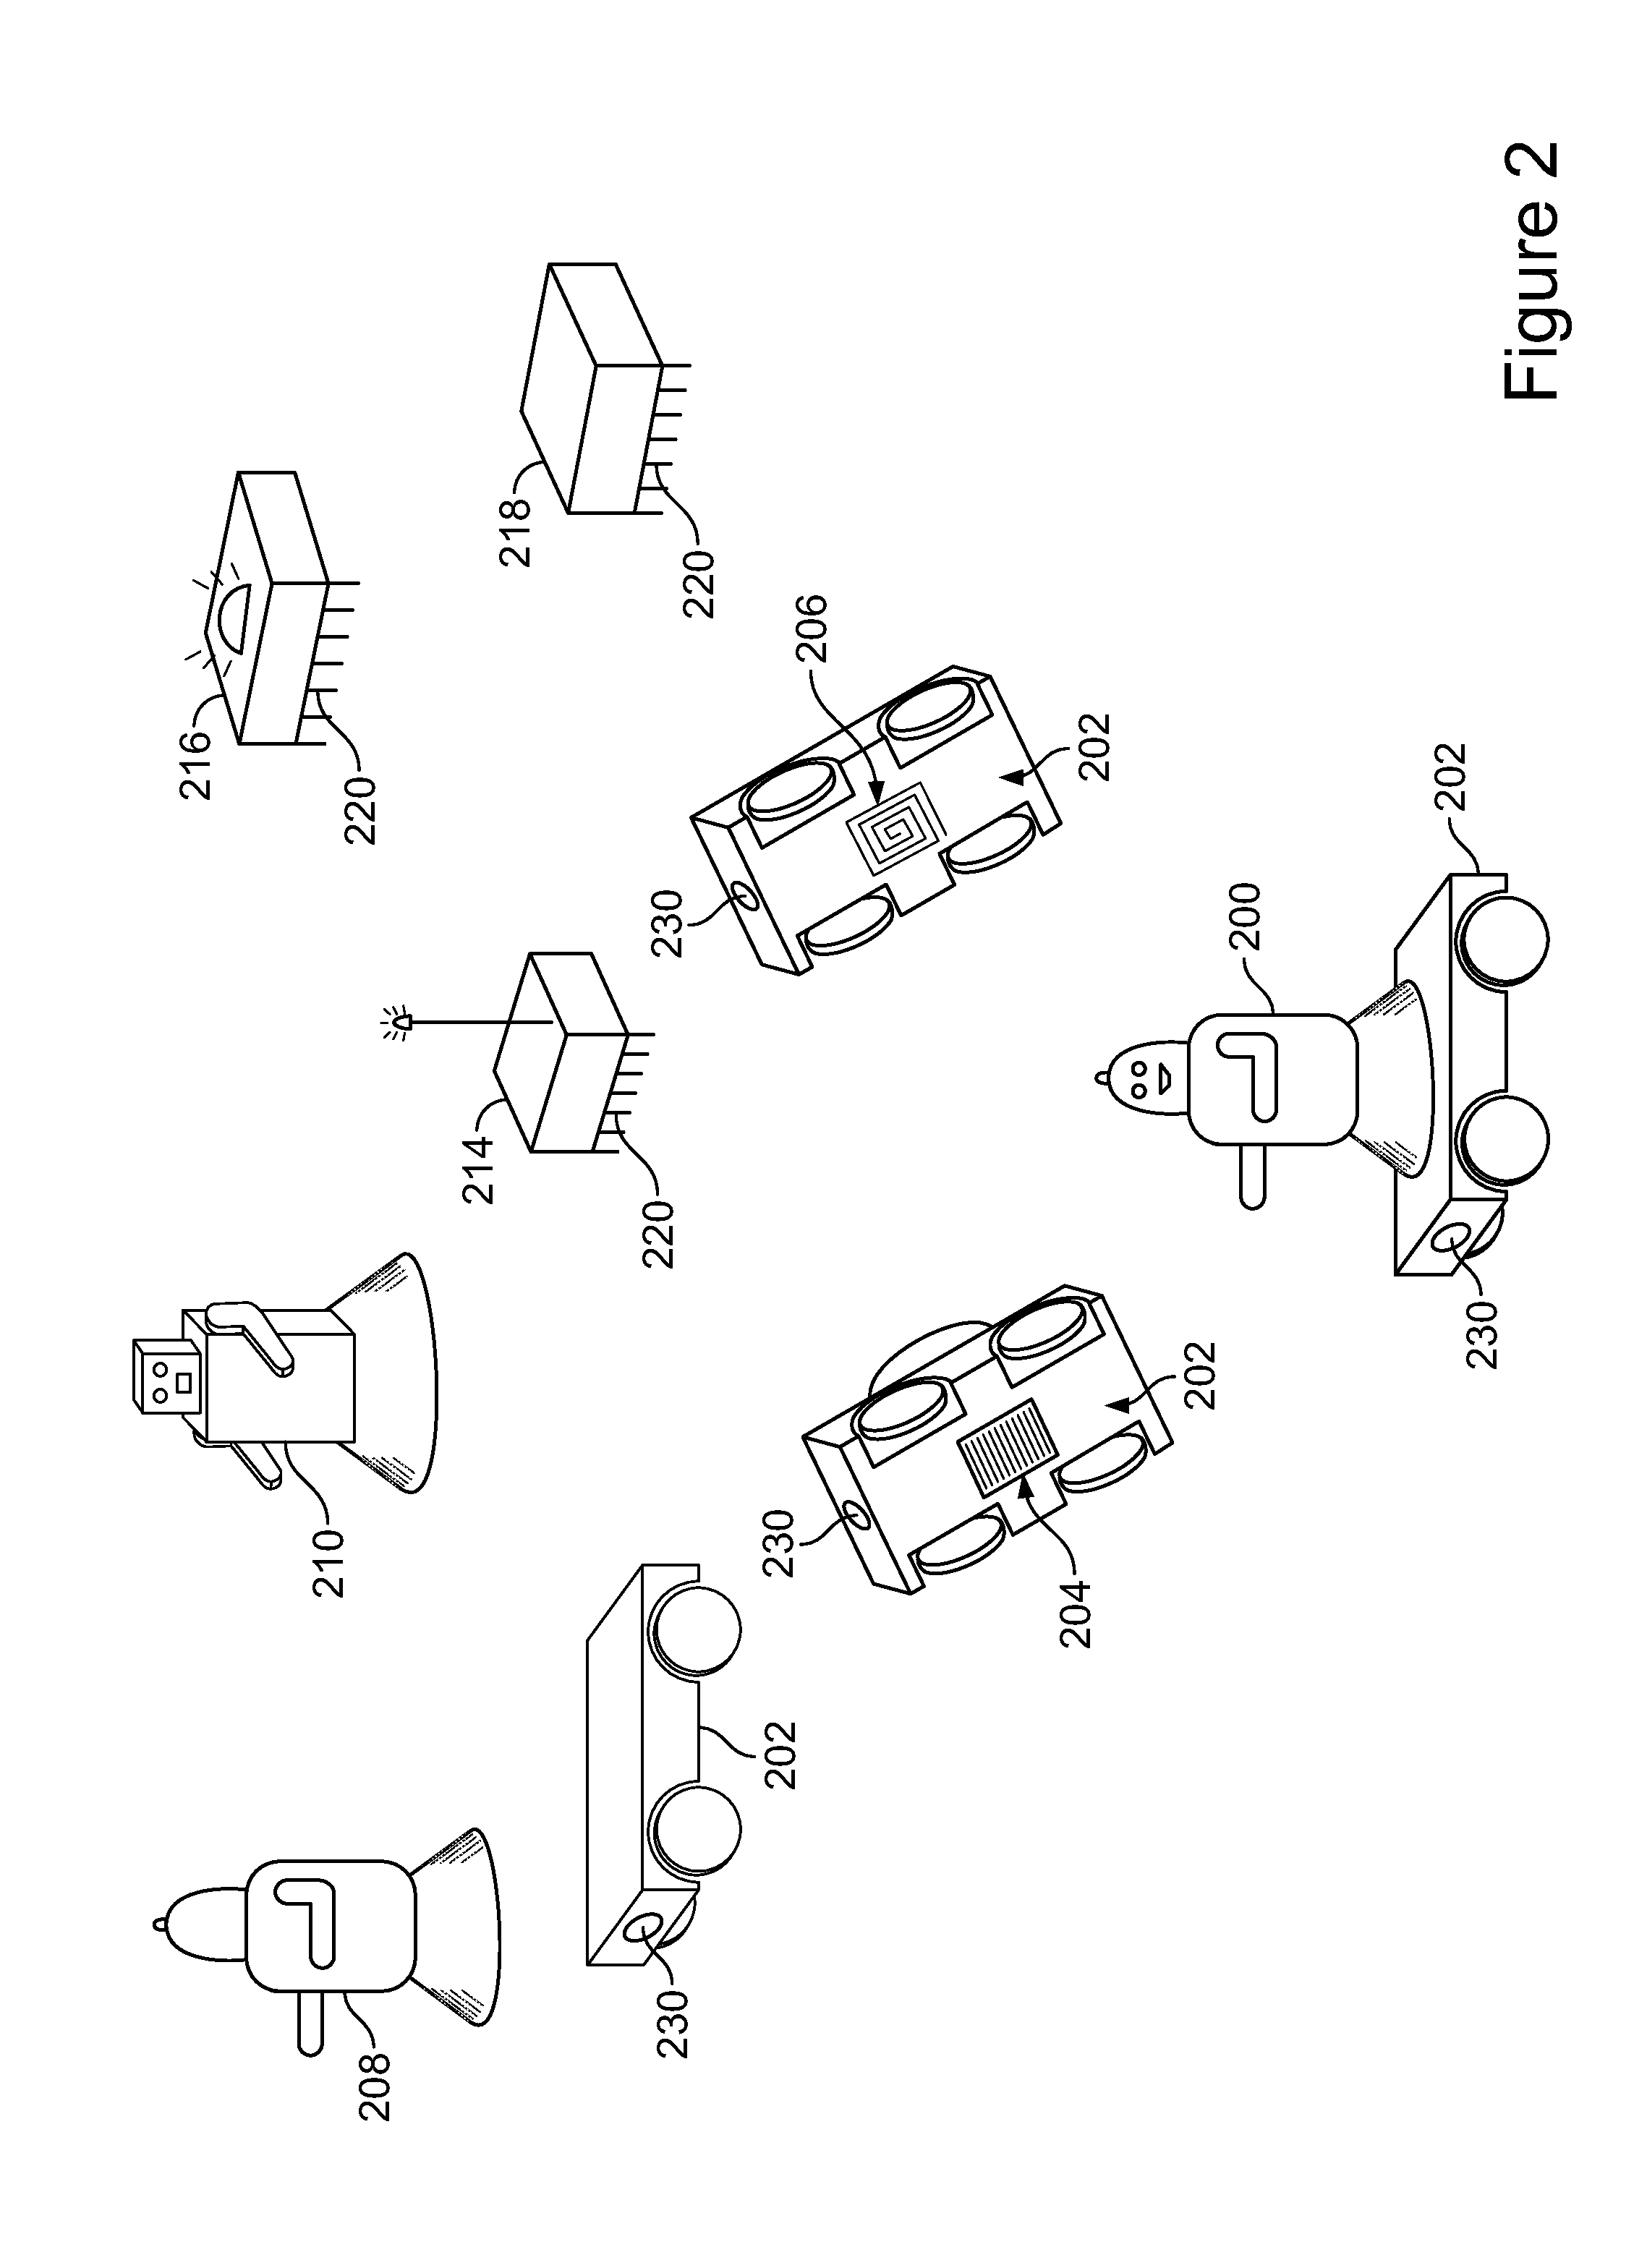 System and apparatus for a controlled toy to interact with a computer game